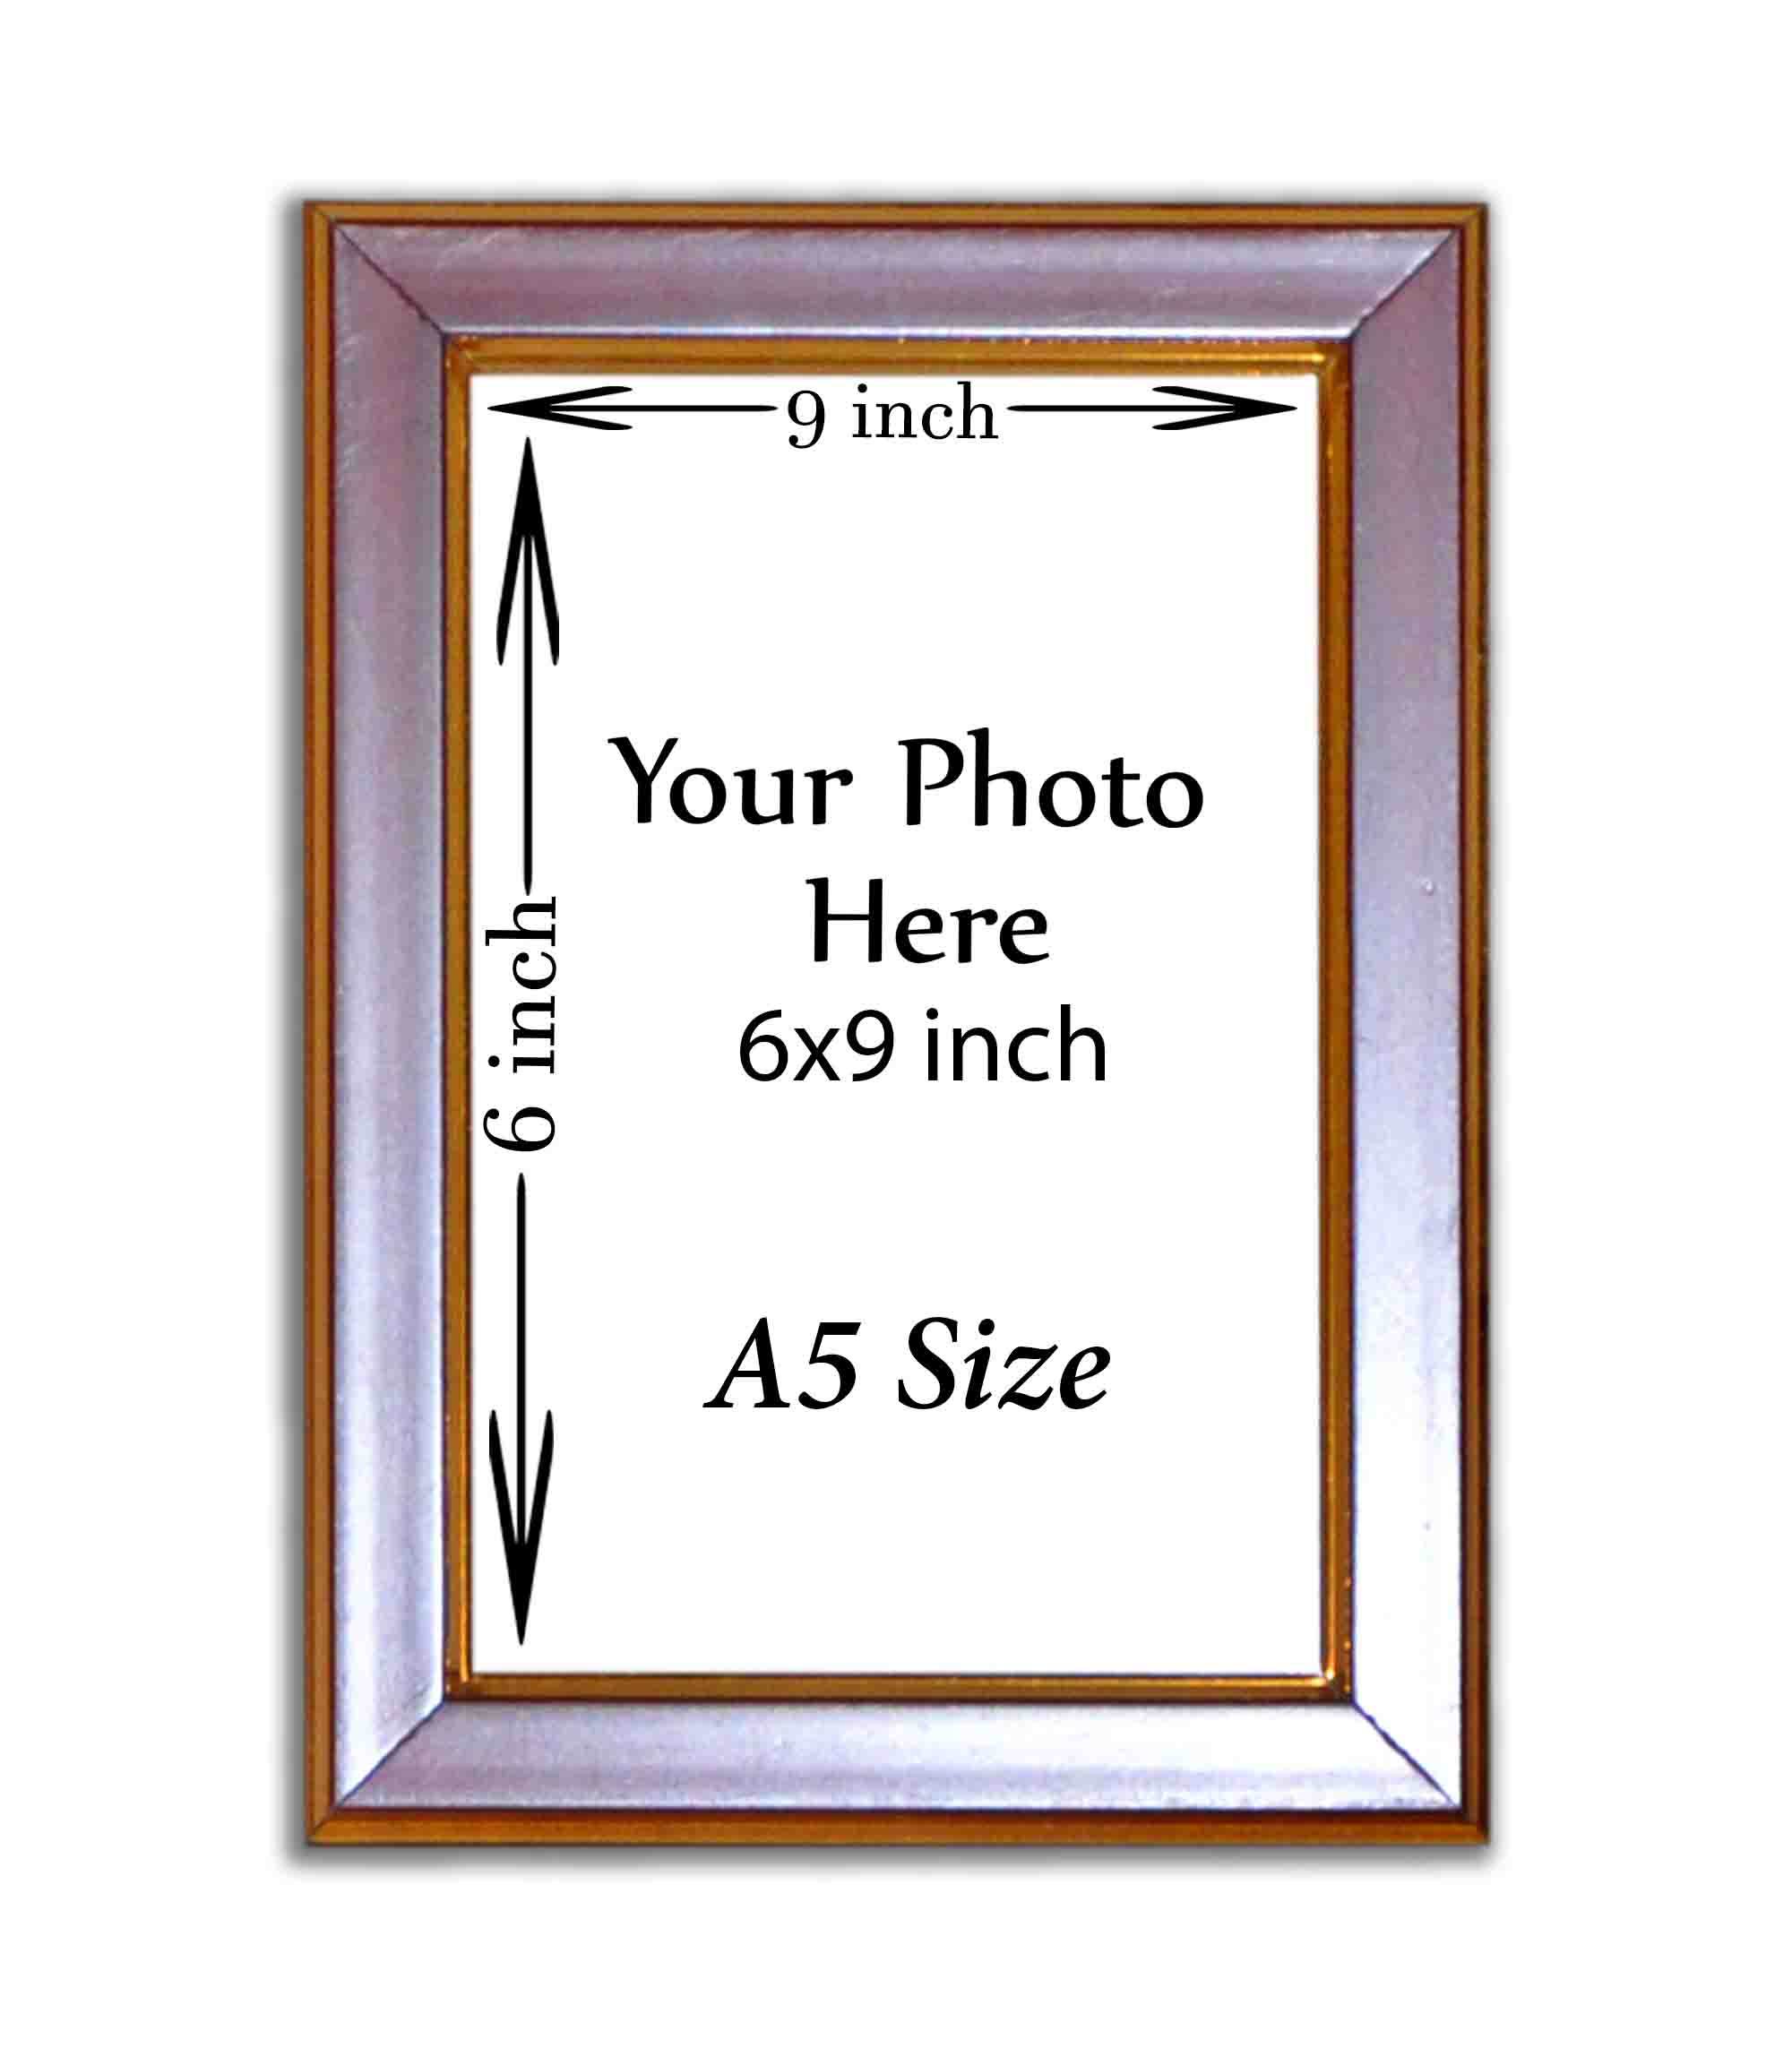 annie abrahamian recommends is 9 inches a good size picture pic